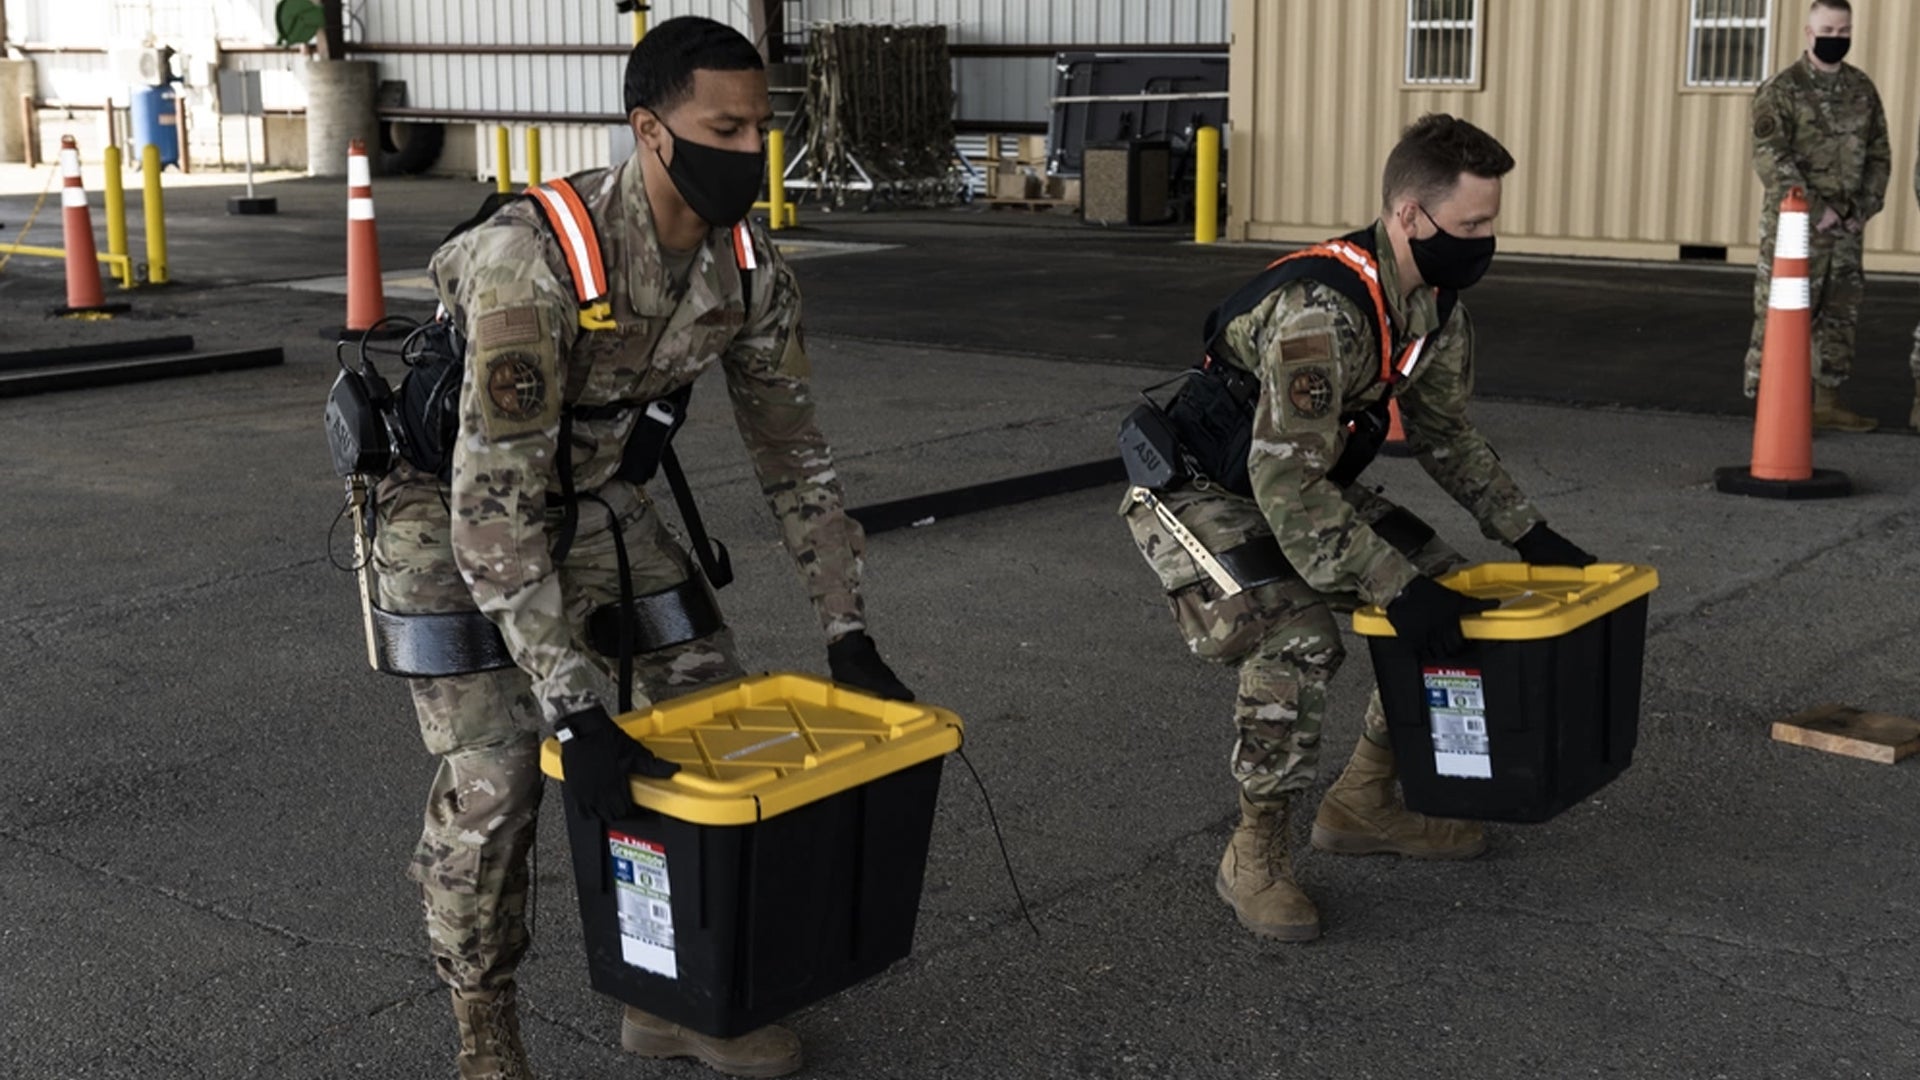 The Air Force is testing a new exoskeleton to lighten the load for airmen